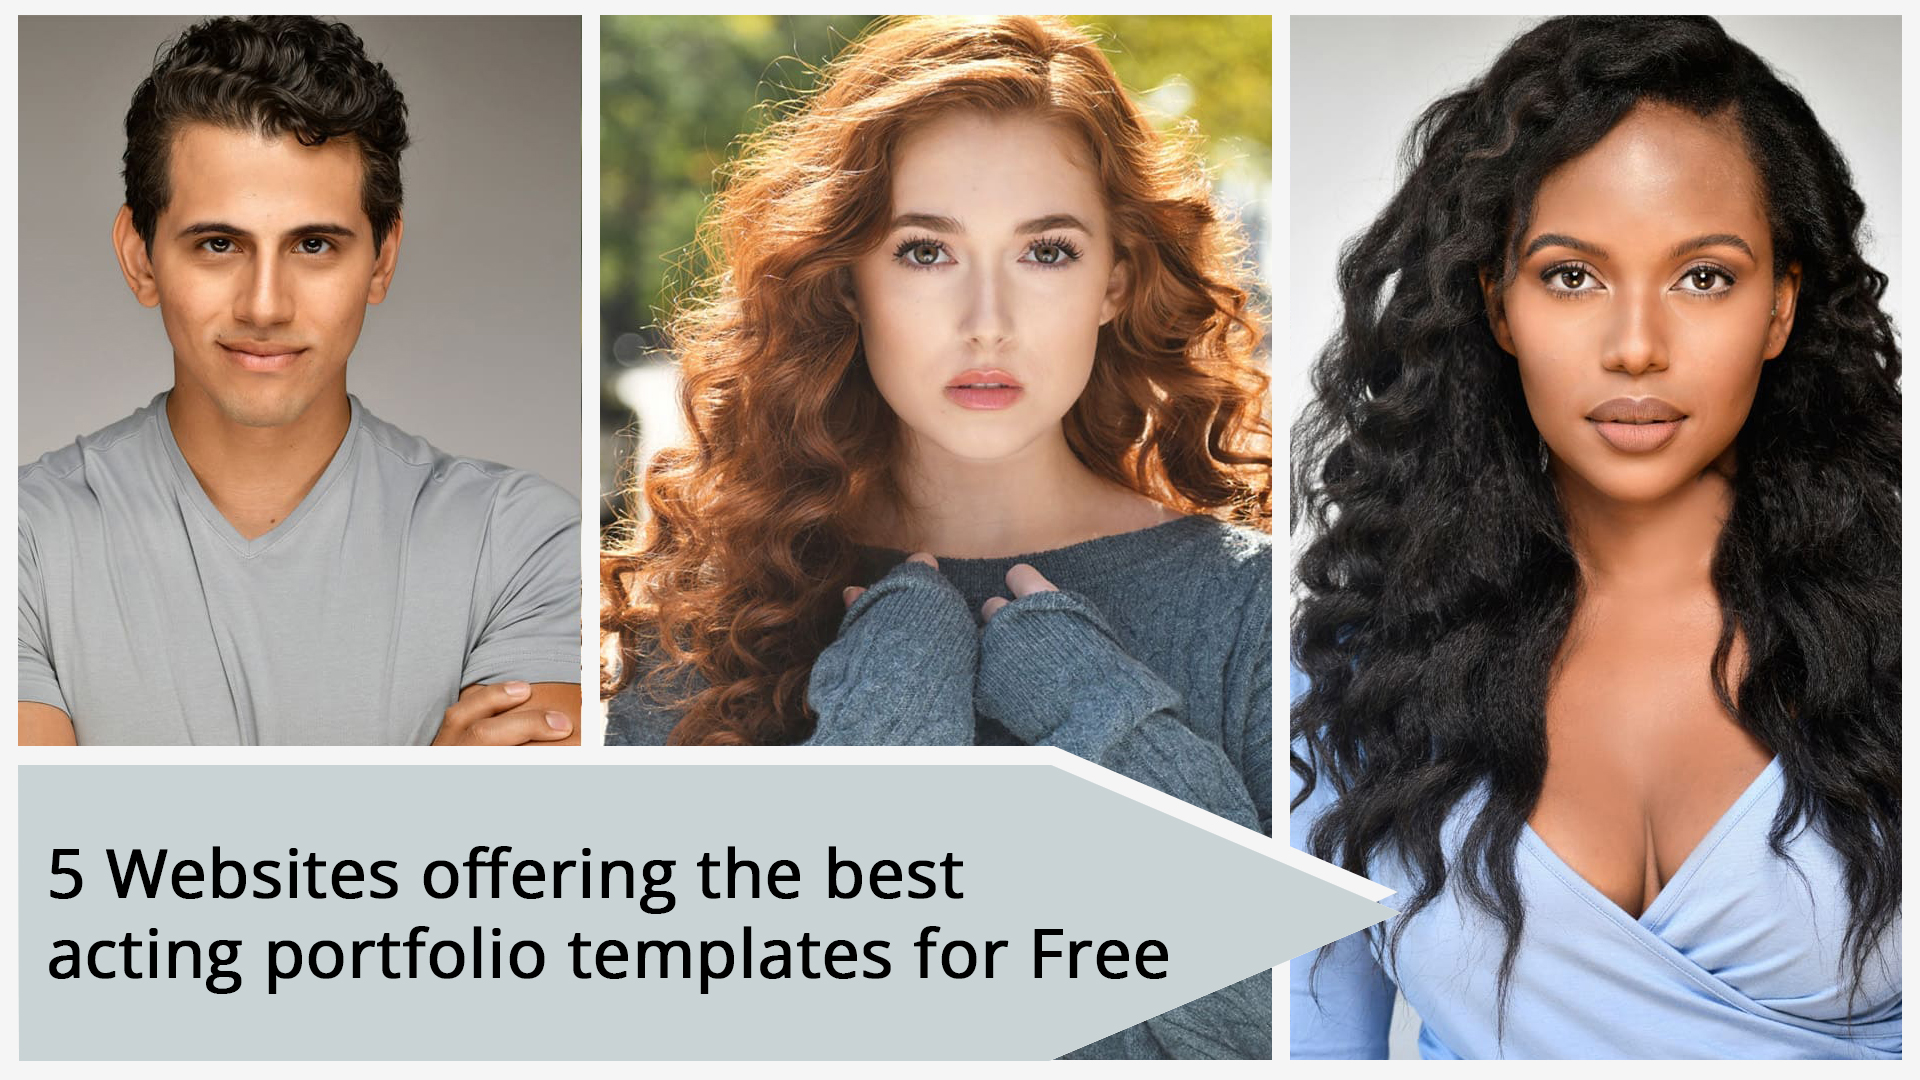 5 Websites offering the best acting portfolio templates for Free